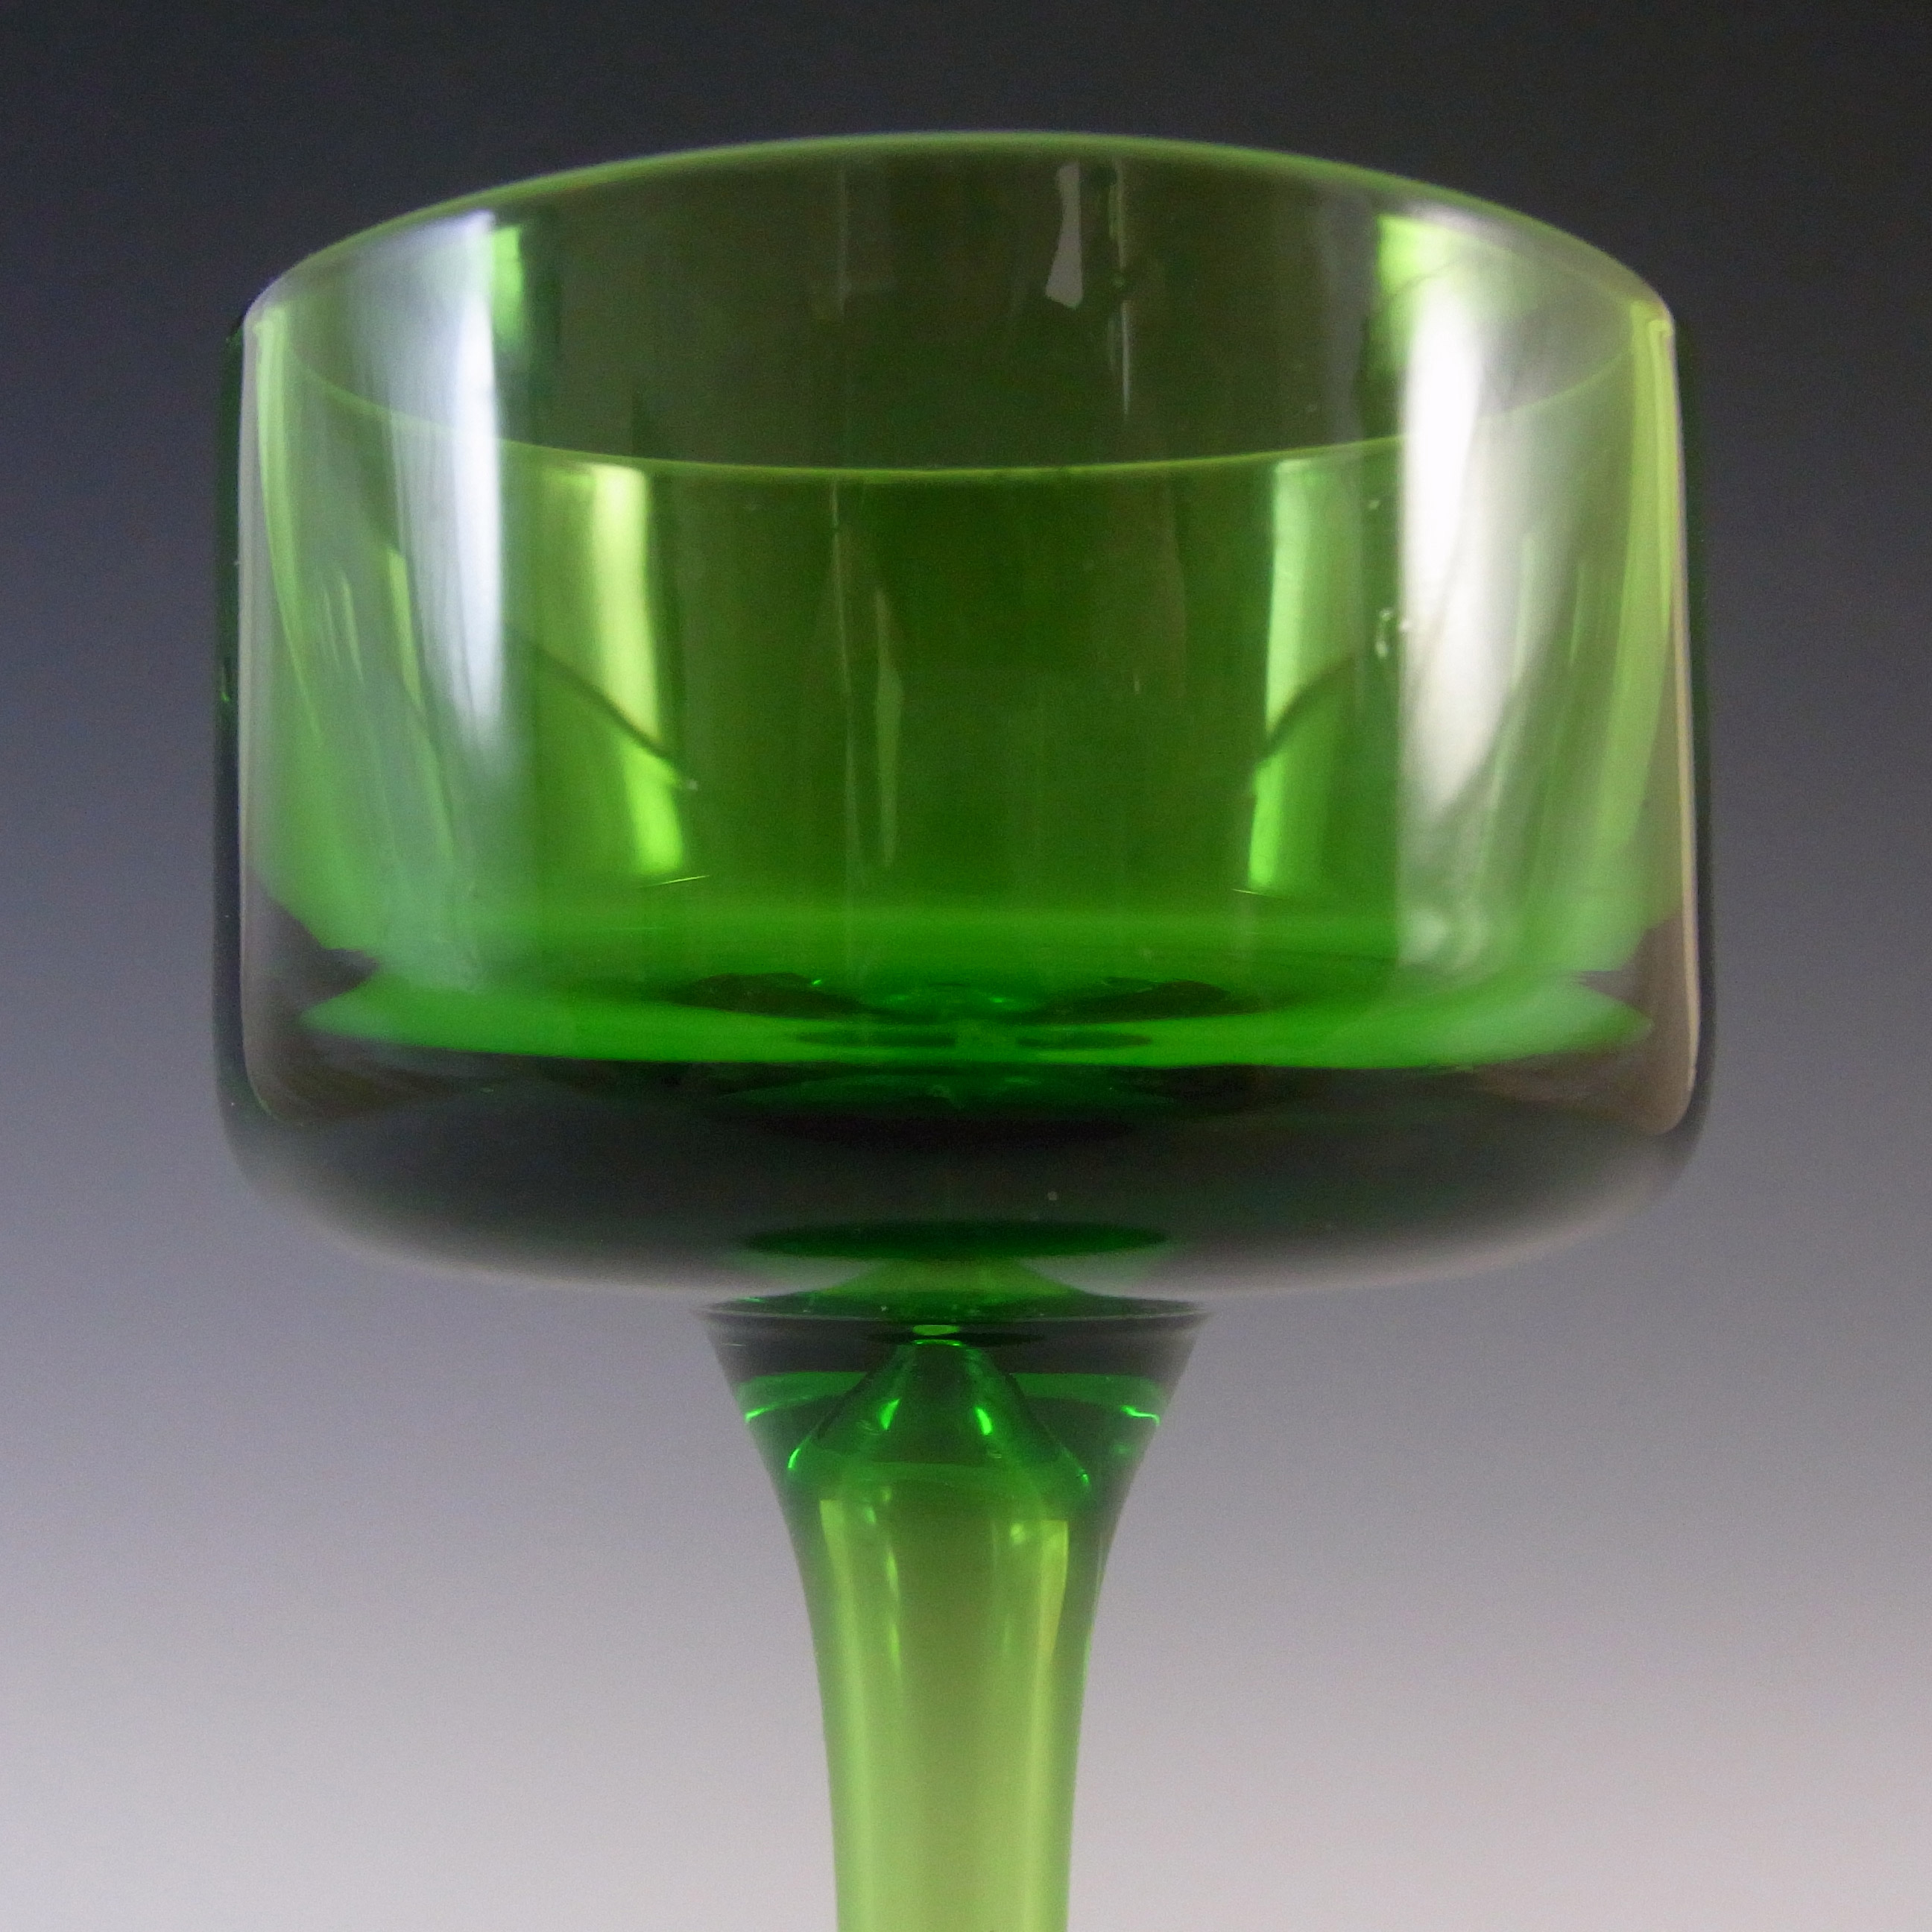 Wedgwood "Brancaster" Green Glass 5.25" Candlestick RSW15/1 - Marked - Click Image to Close